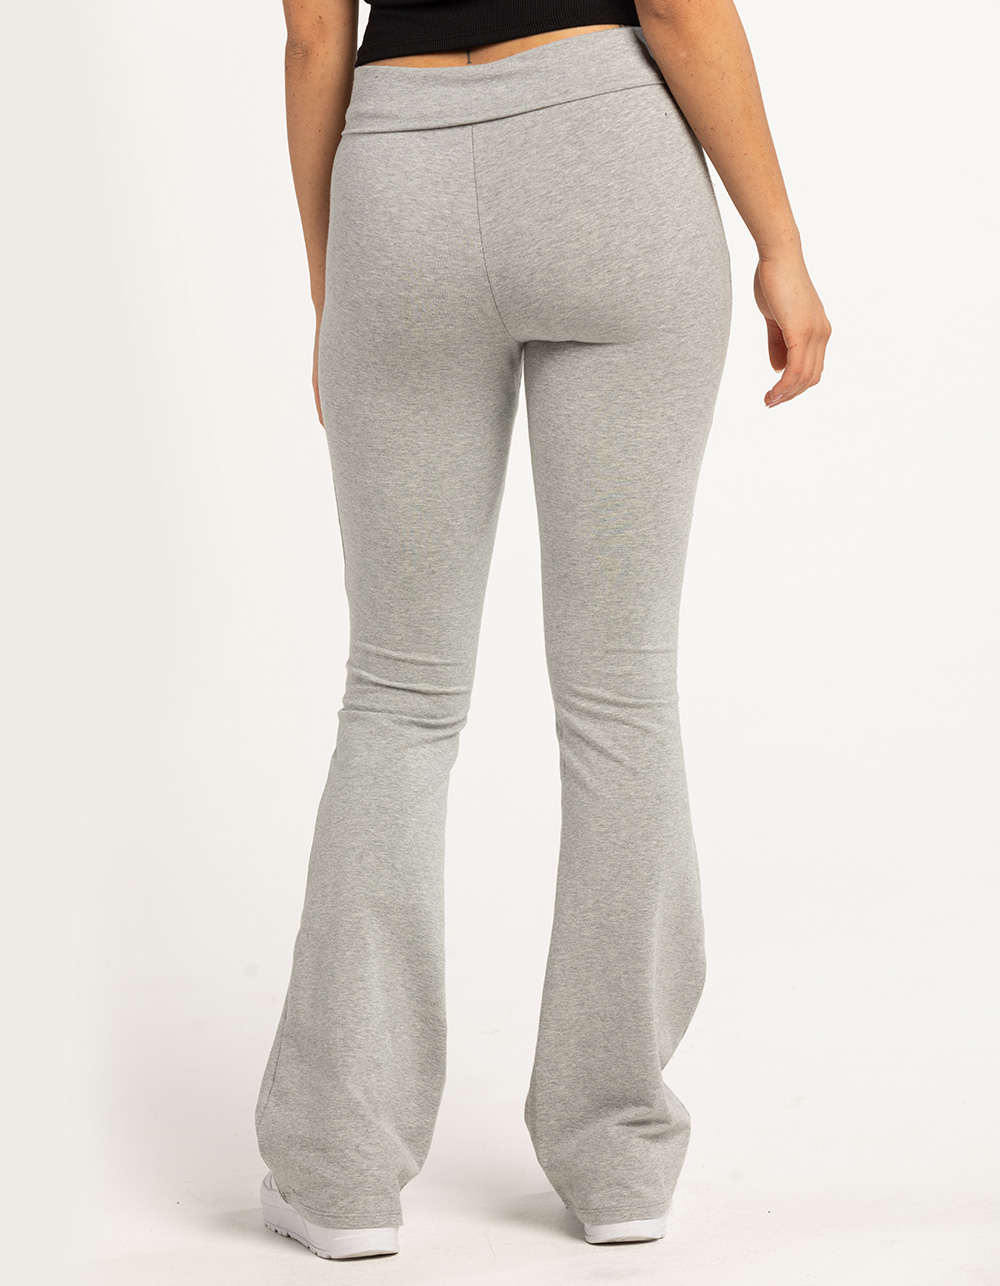 Forever 21 Women's Active High-Rise Flare Leggings in Heather Grey Large